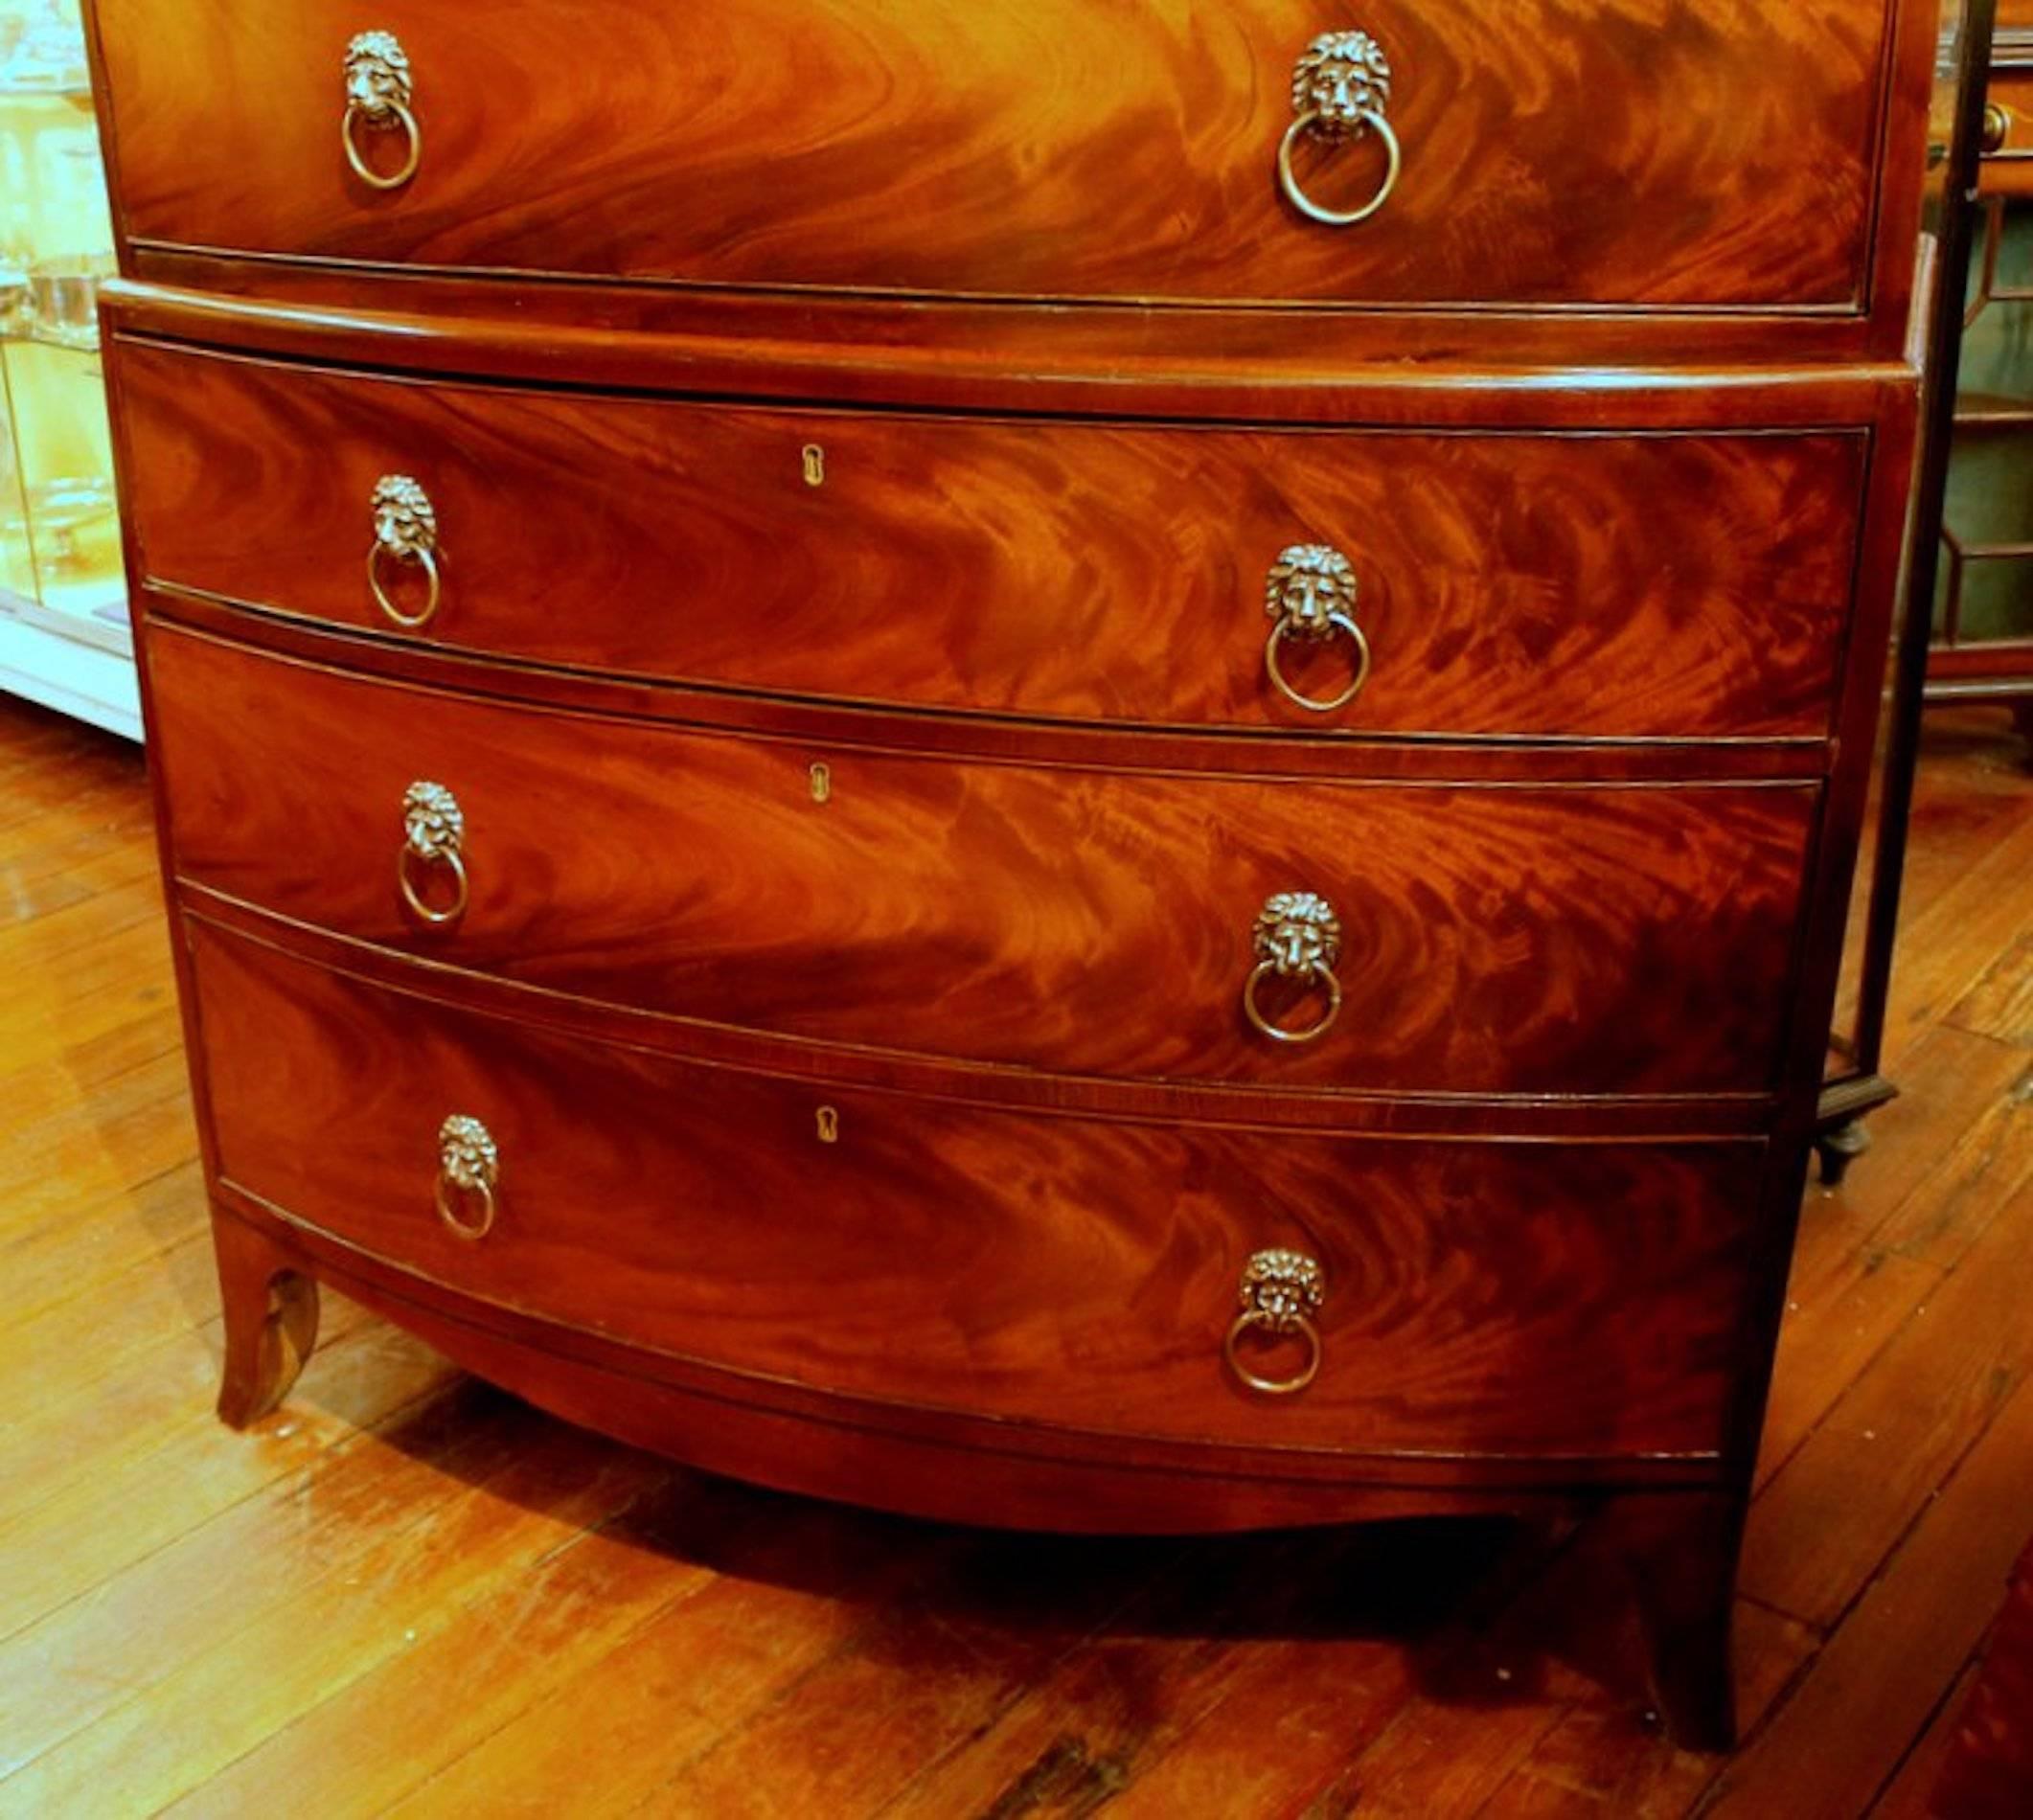 Magnificent quality antique English bookmatched crotch mahogany George III bow-front chest on chest. Please note the fabulous bookmatched mahogany veneers across the front of the drawers - superior quality and bow-fronted!

The lion head pulls are